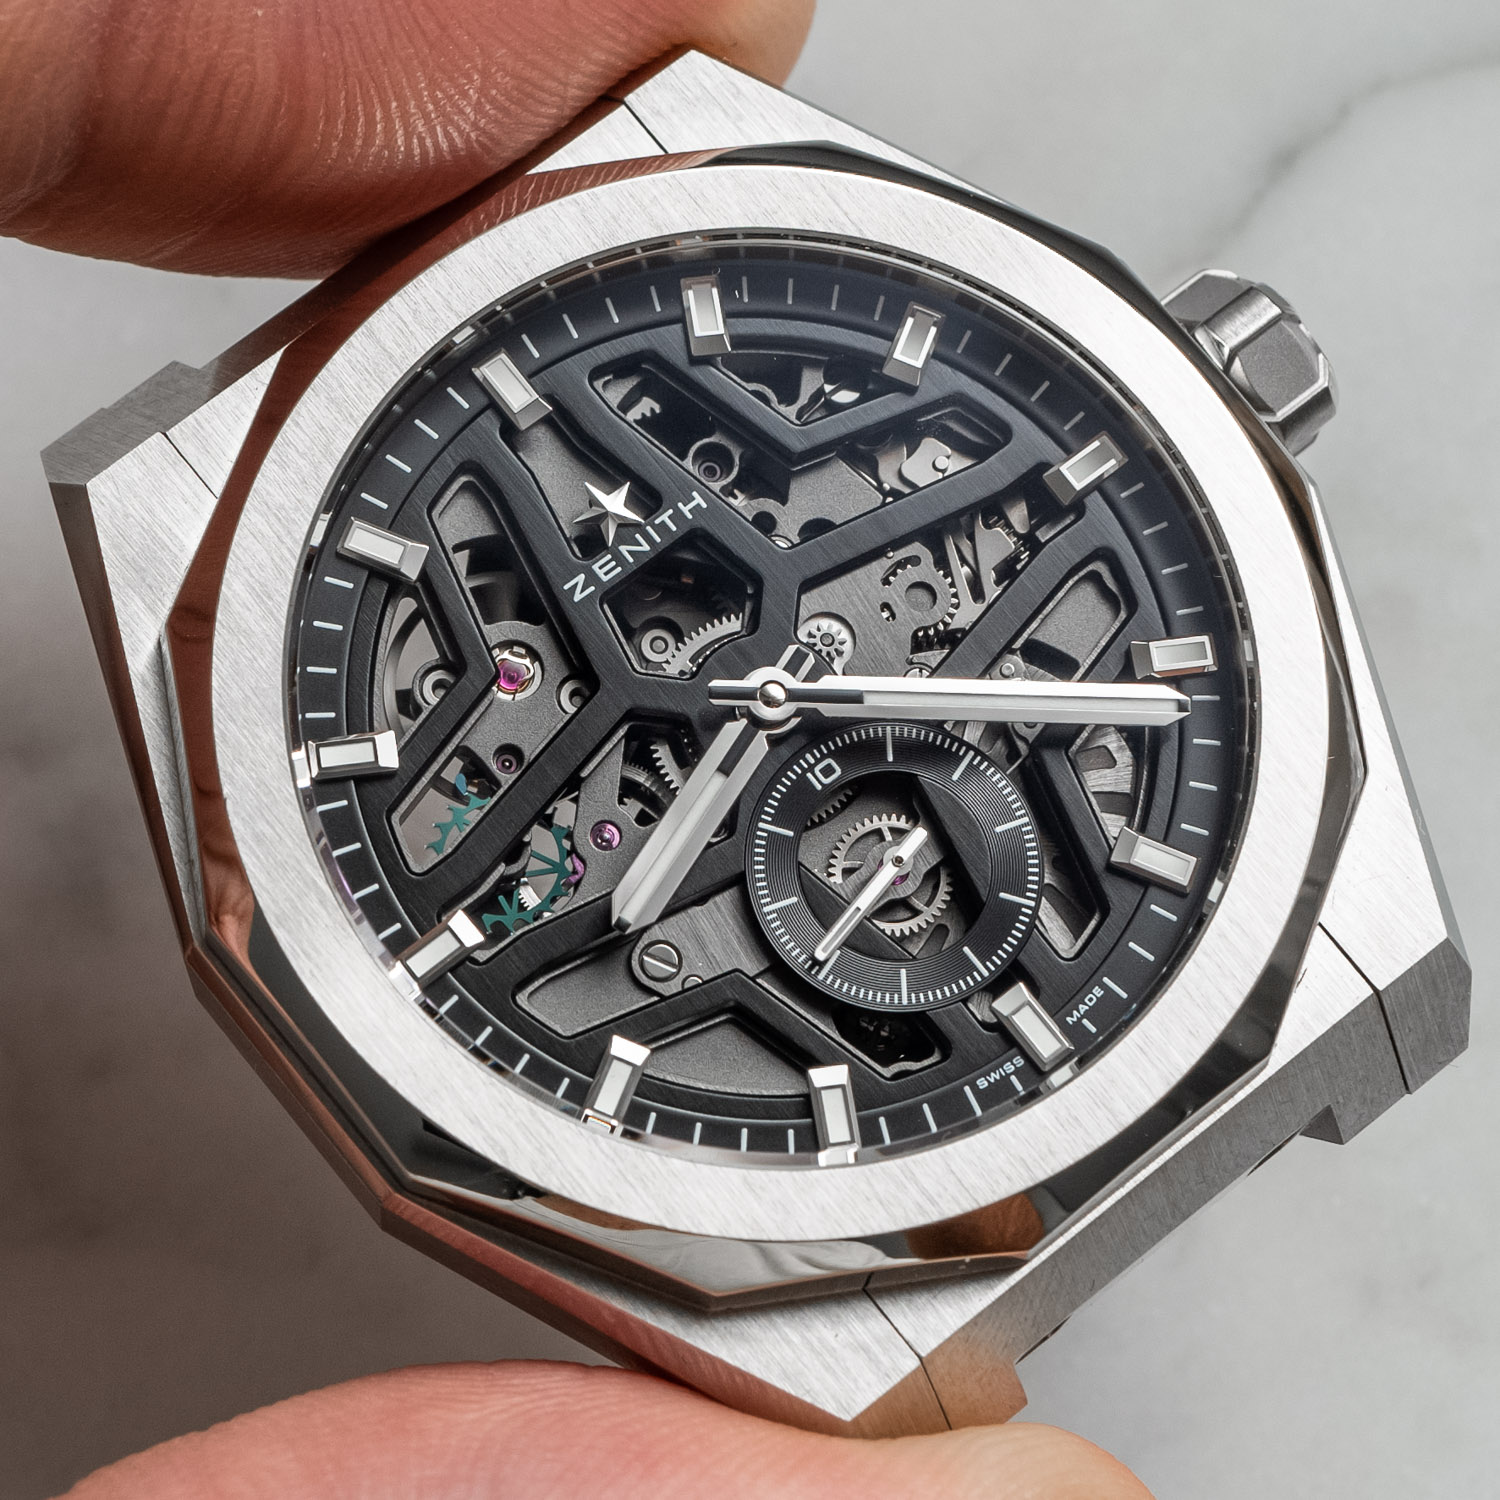 The new Zenith Defy Skyline Skeleton - Today on the wrist - An online  magazine about watches